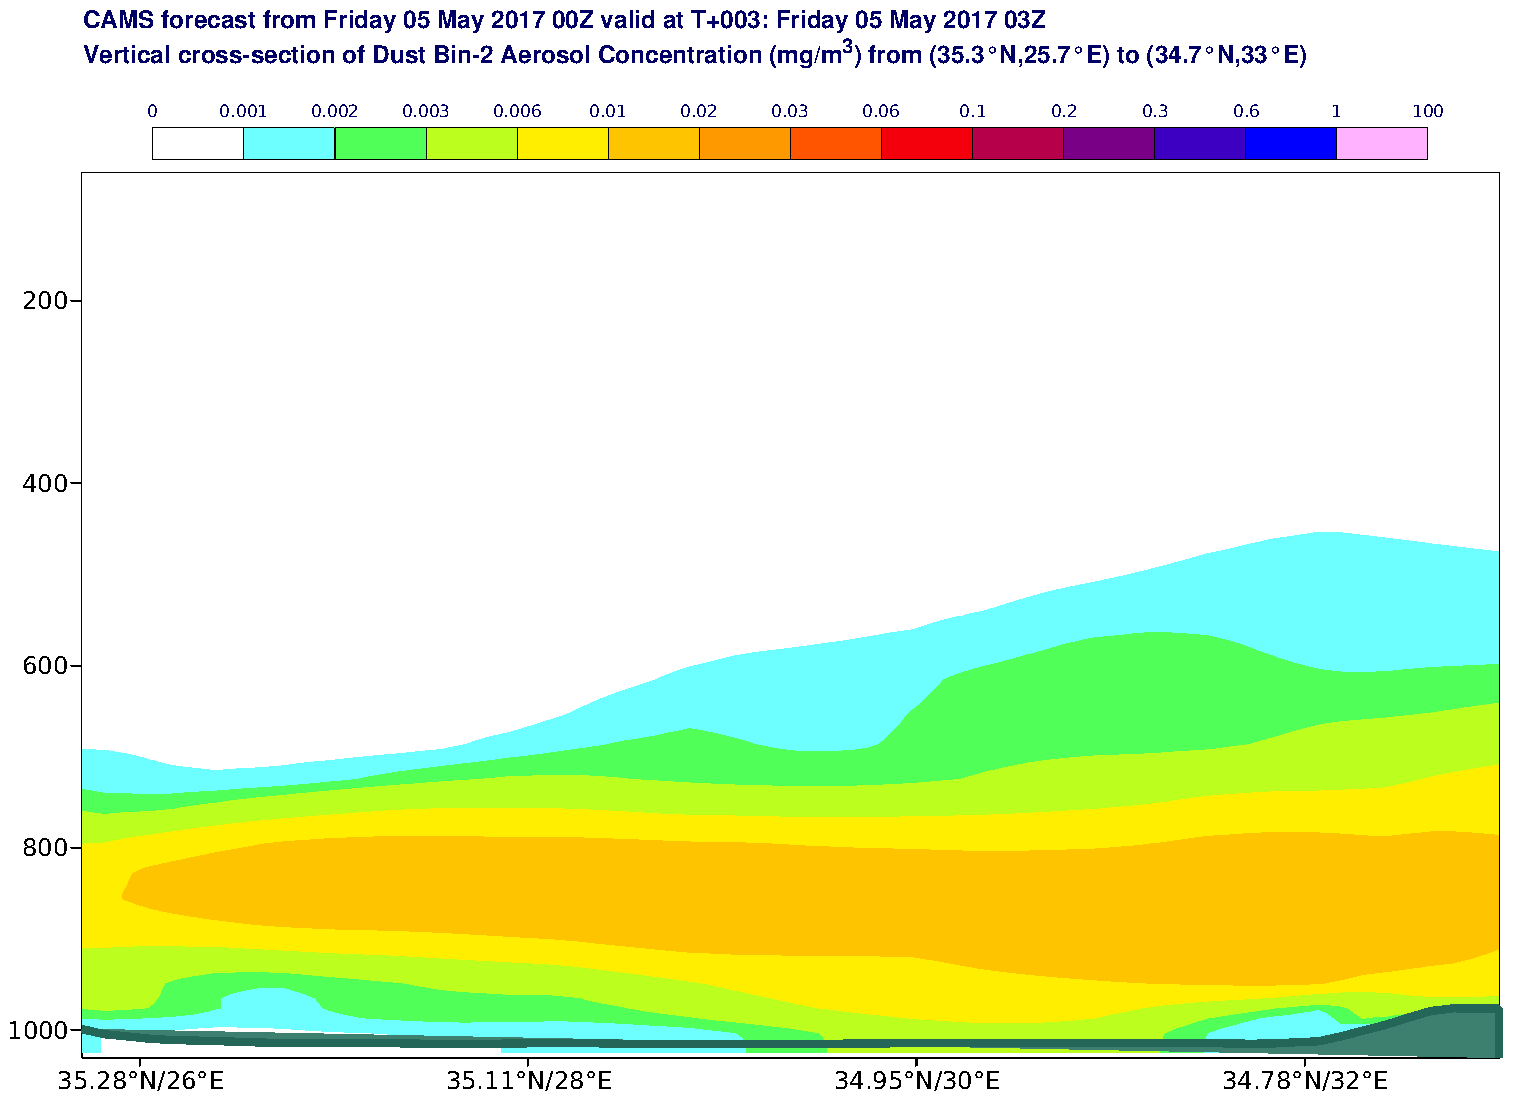 Vertical cross-section of Dust Bin-2 Aerosol Concentration (mg/m3) valid at T3 - 2017-05-05 03:00